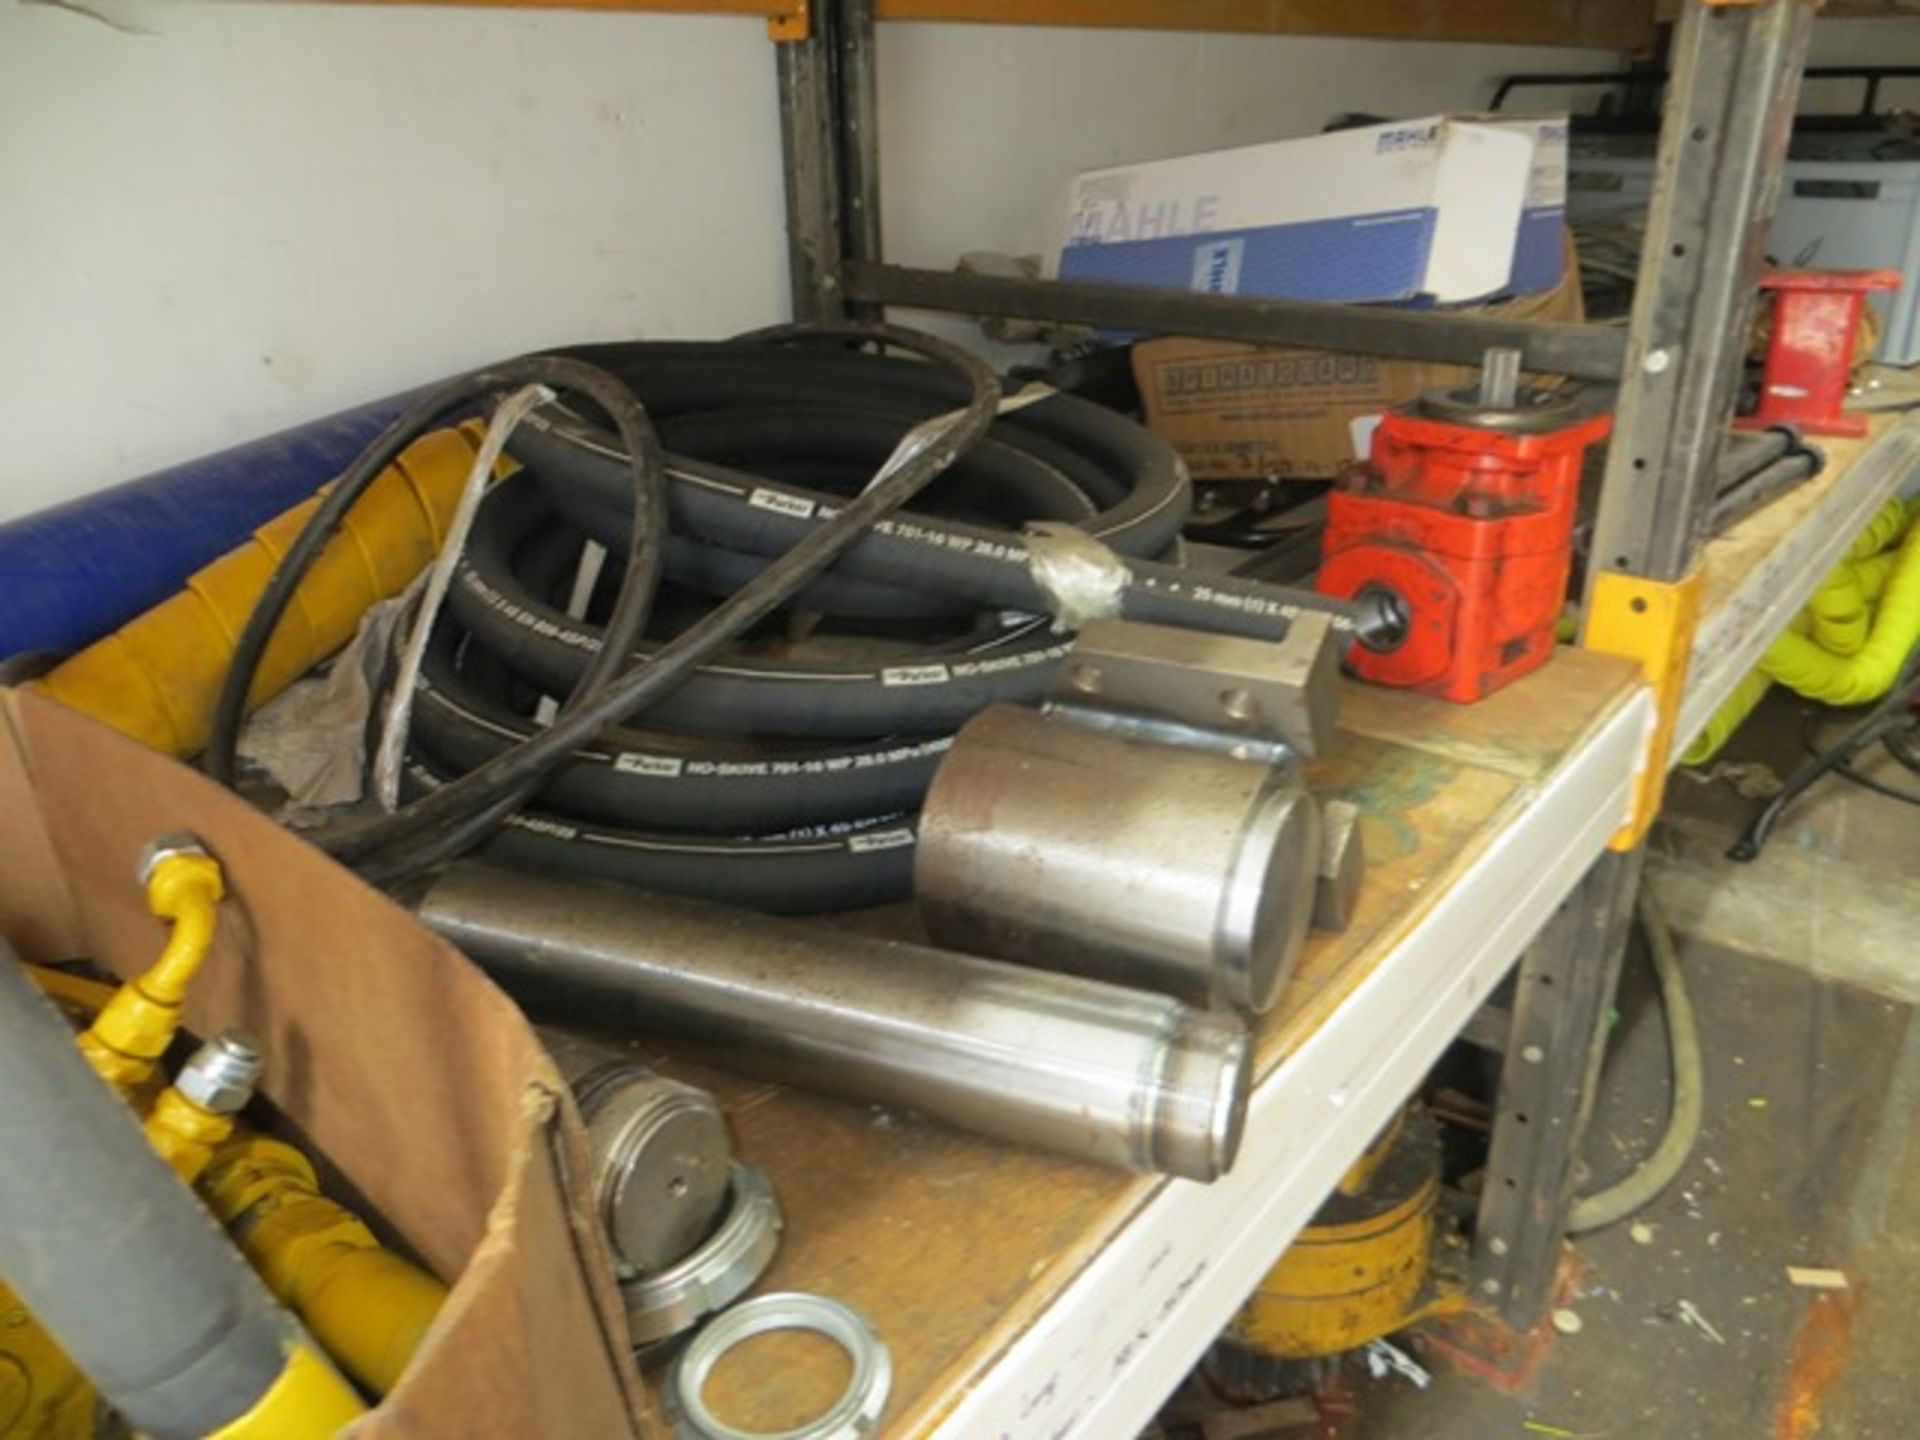 Contents of container to include hose, rams, pins, plates, racking, hydraulic hose, spiral wraps - Image 4 of 4